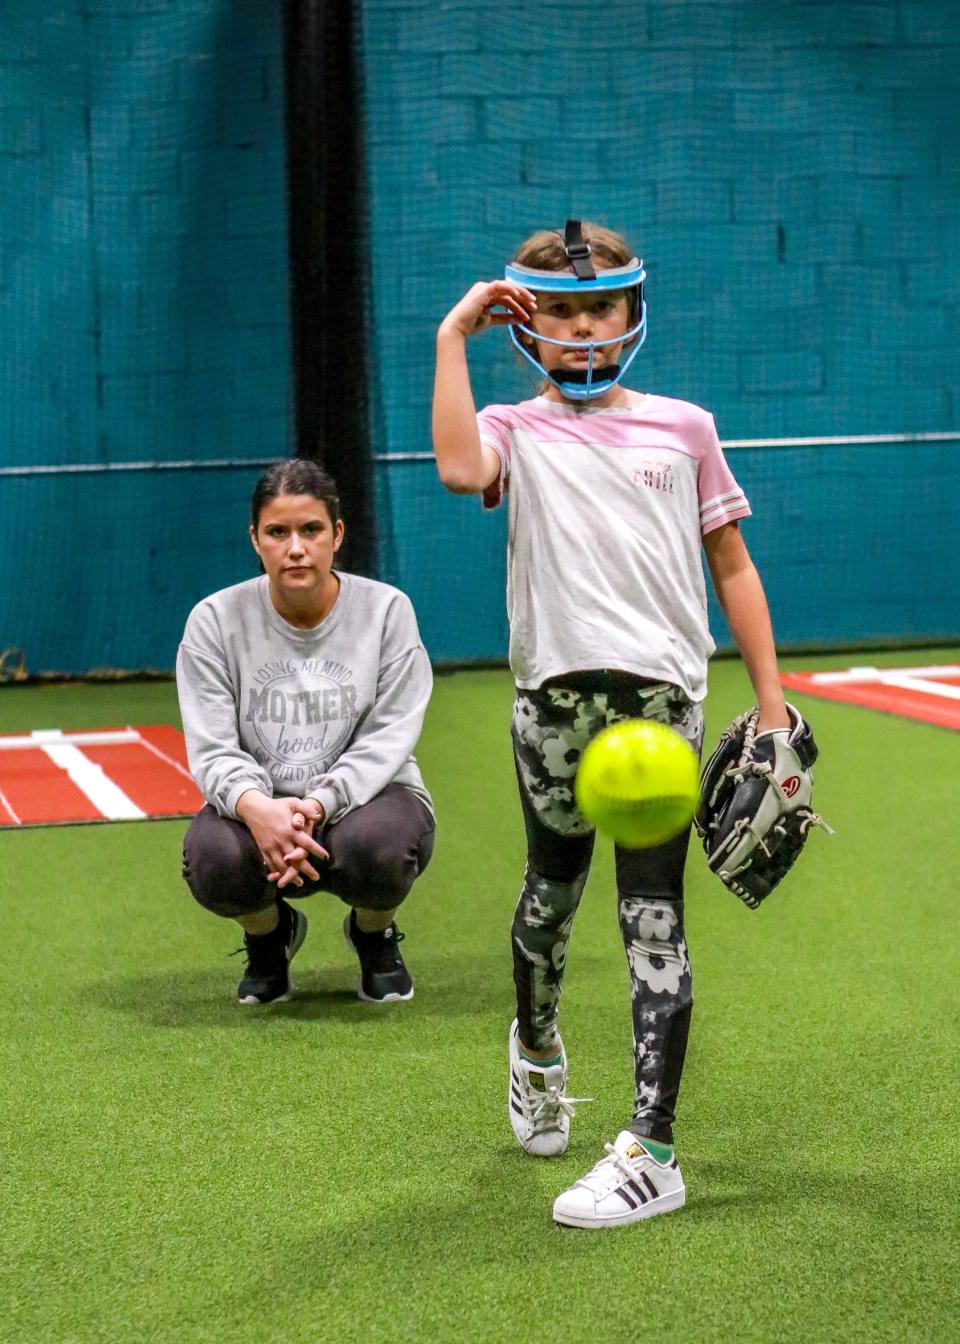 Sophia Almeida delivers a pitch under the watchful eye of her pitching instructor Ashley Ambrose at the new location of Inside The Park Batting Cages in New Bedford